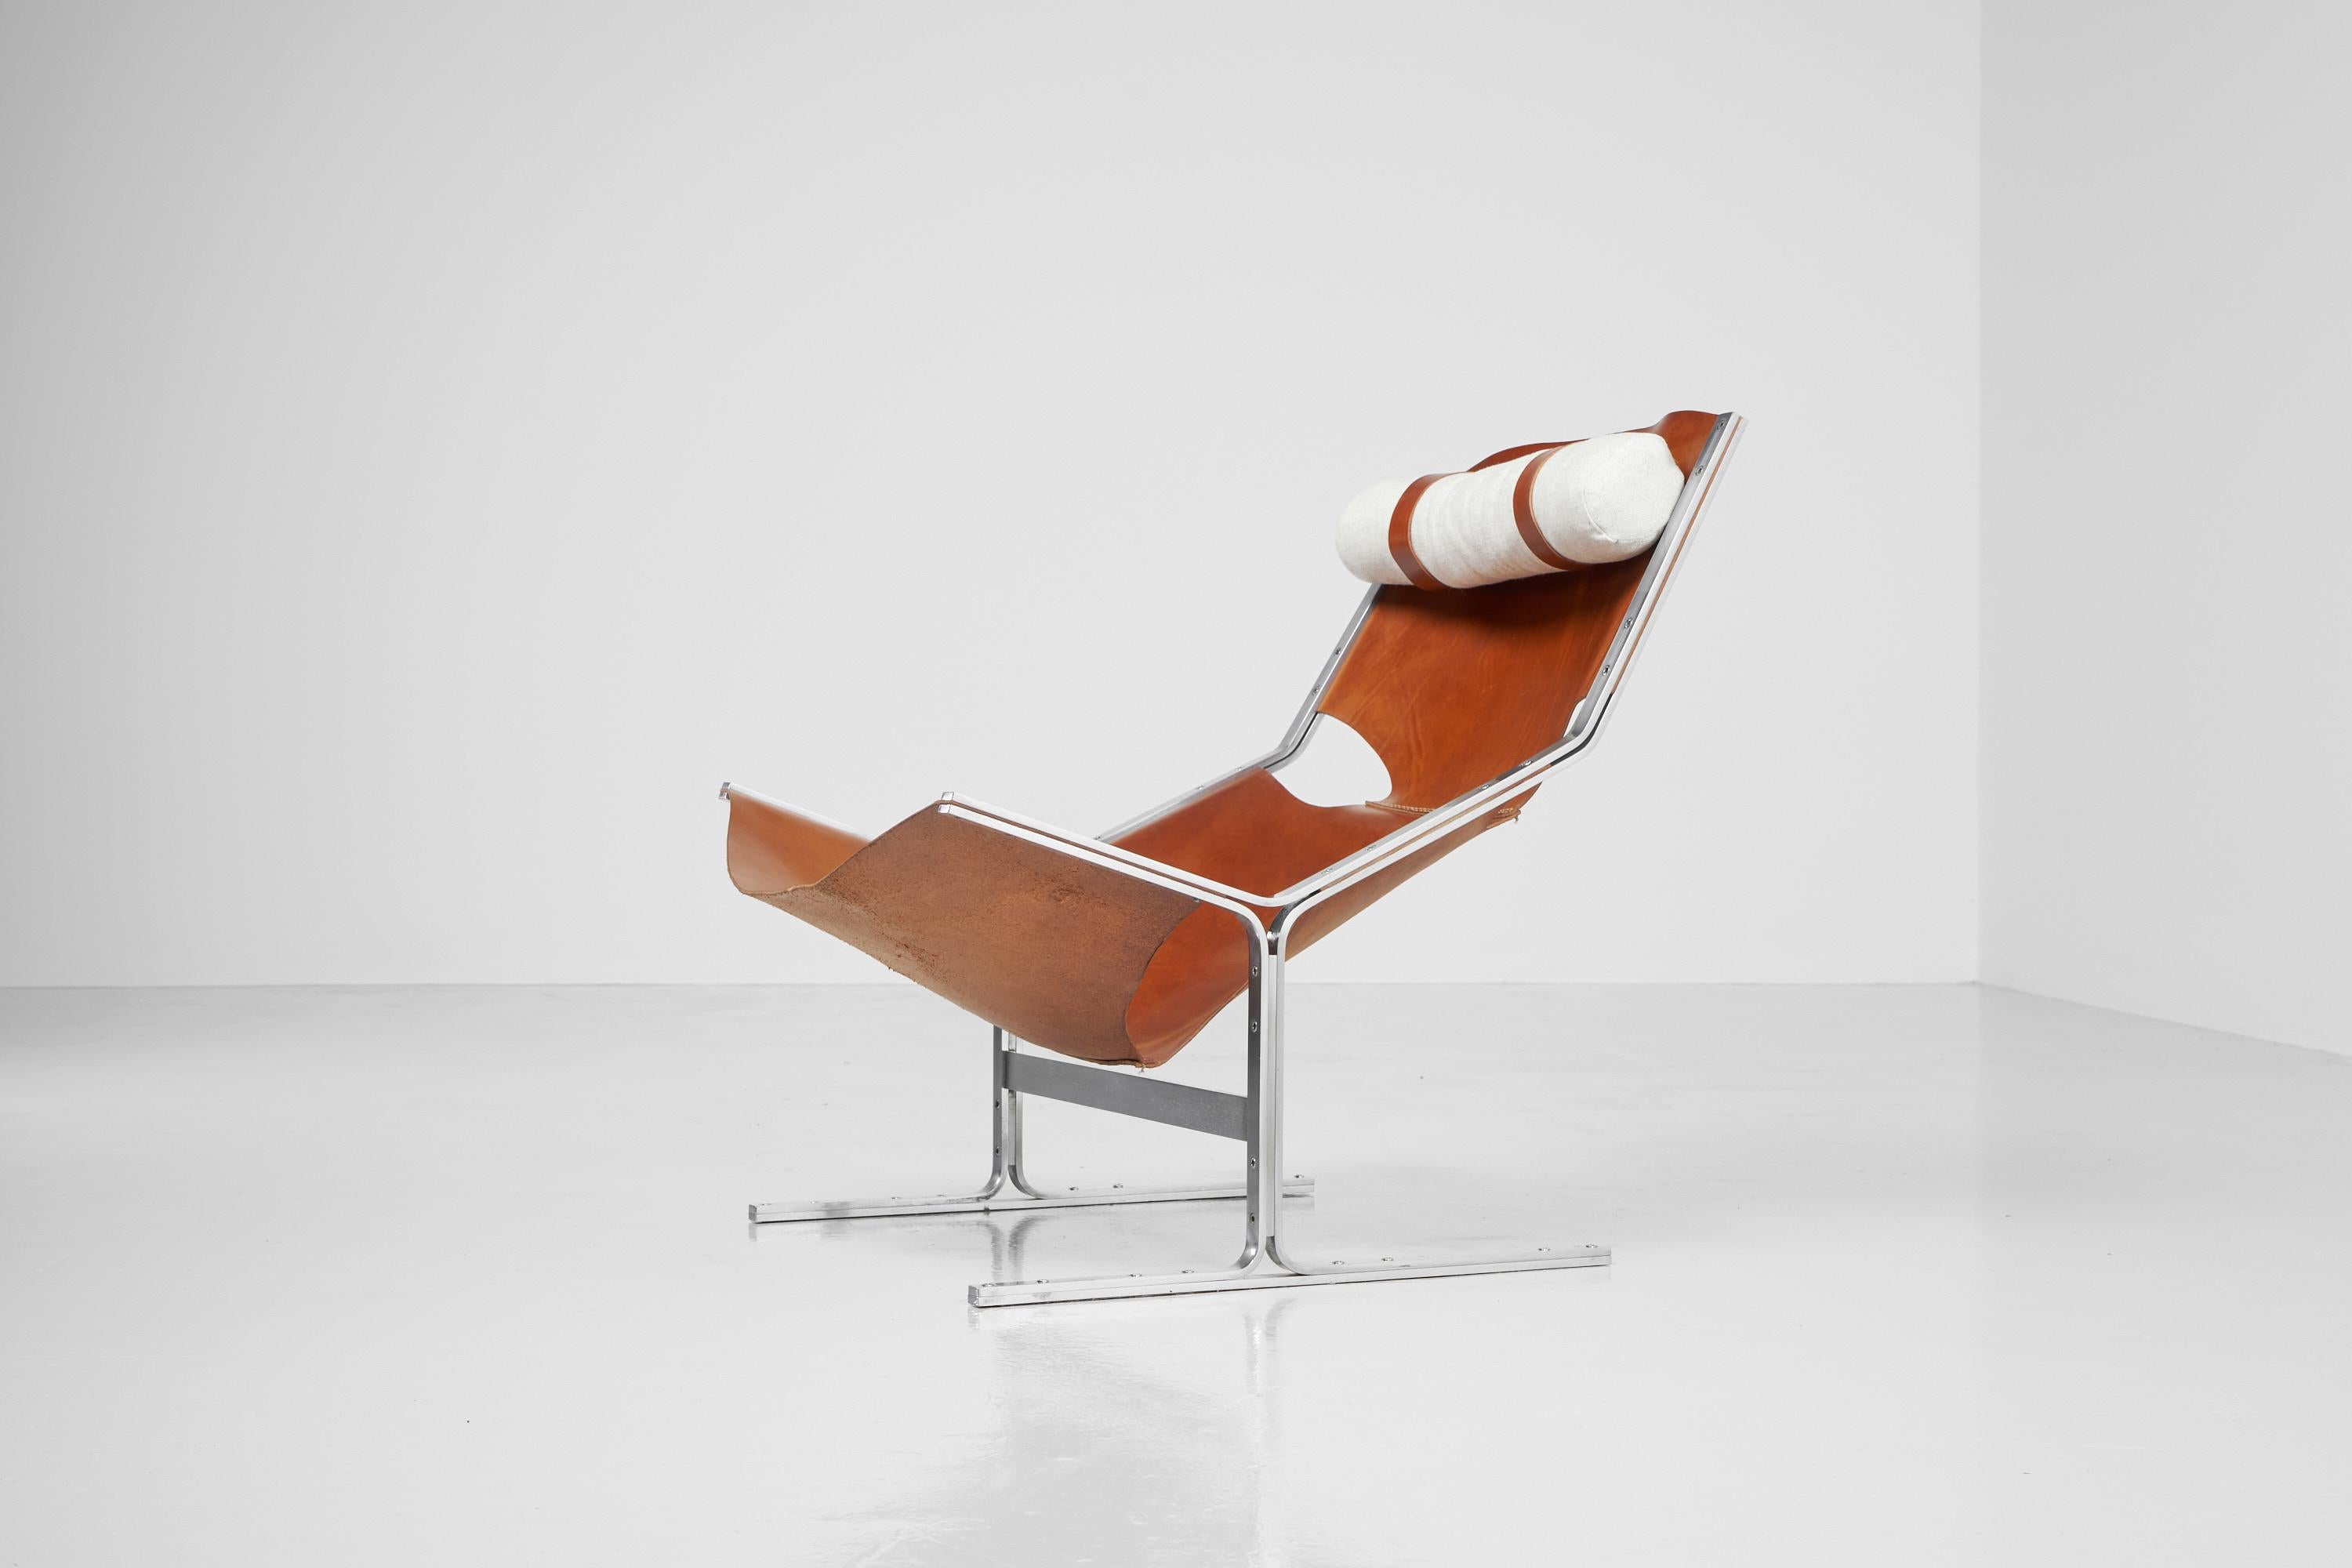 Fantastic shaped sling lounge chair designed by Pierre Thielen and sold at Metz & Co, The Netherlands 1960s. It is unkonwn who produced this piece, probably it was made by the personal blacksmith from Metz & Co. This is a fantastic shaped chair, it